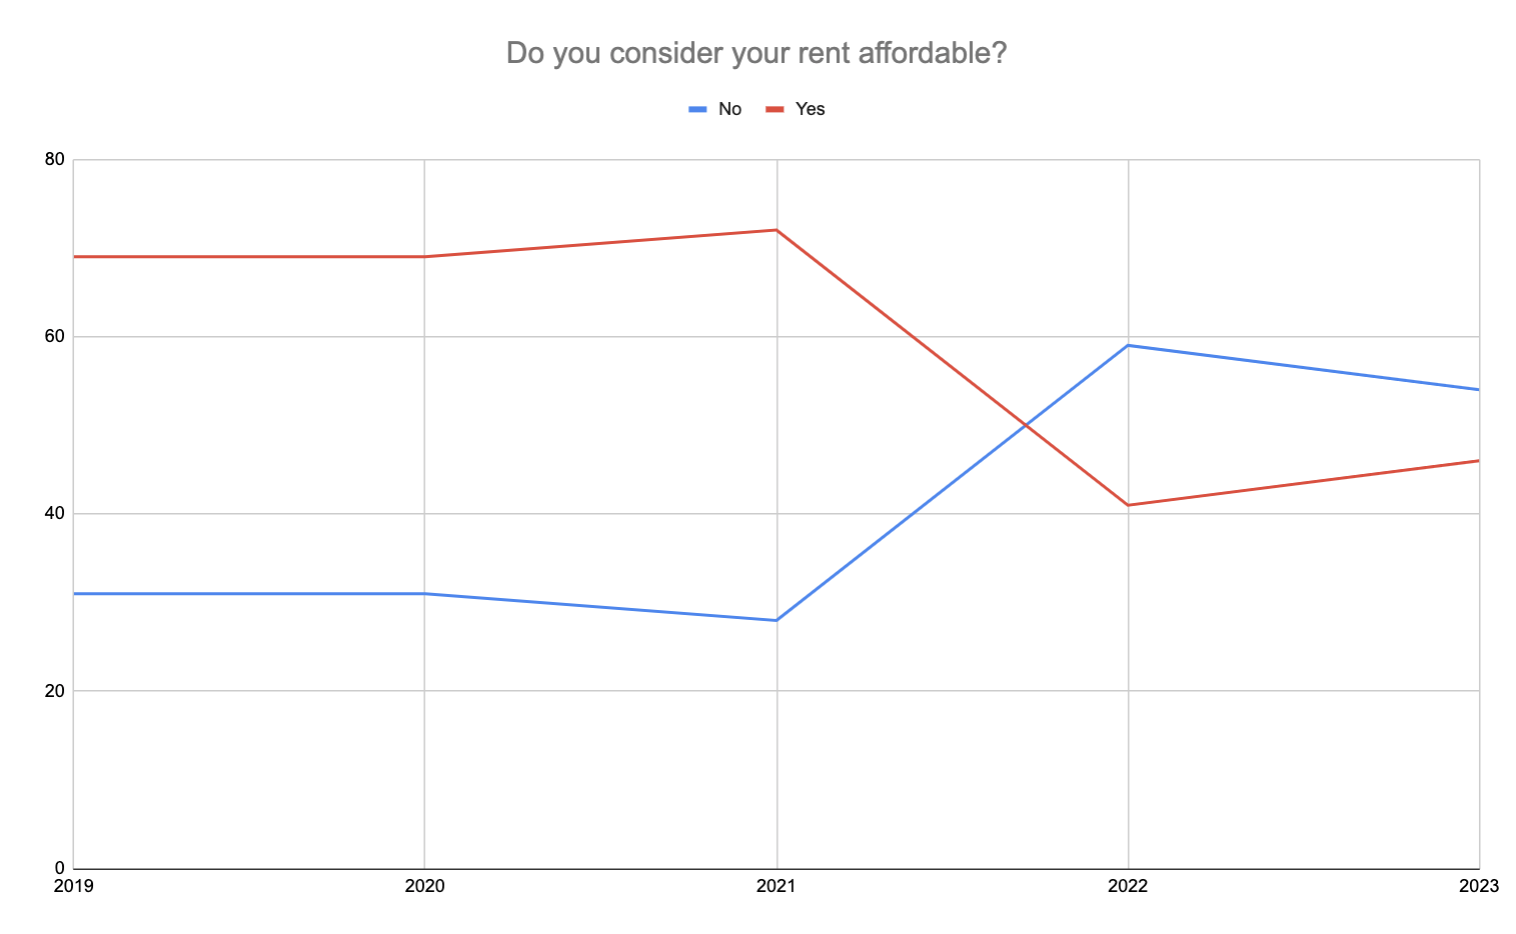 Chart showing results of a yes or no survey if people consider rent affordable